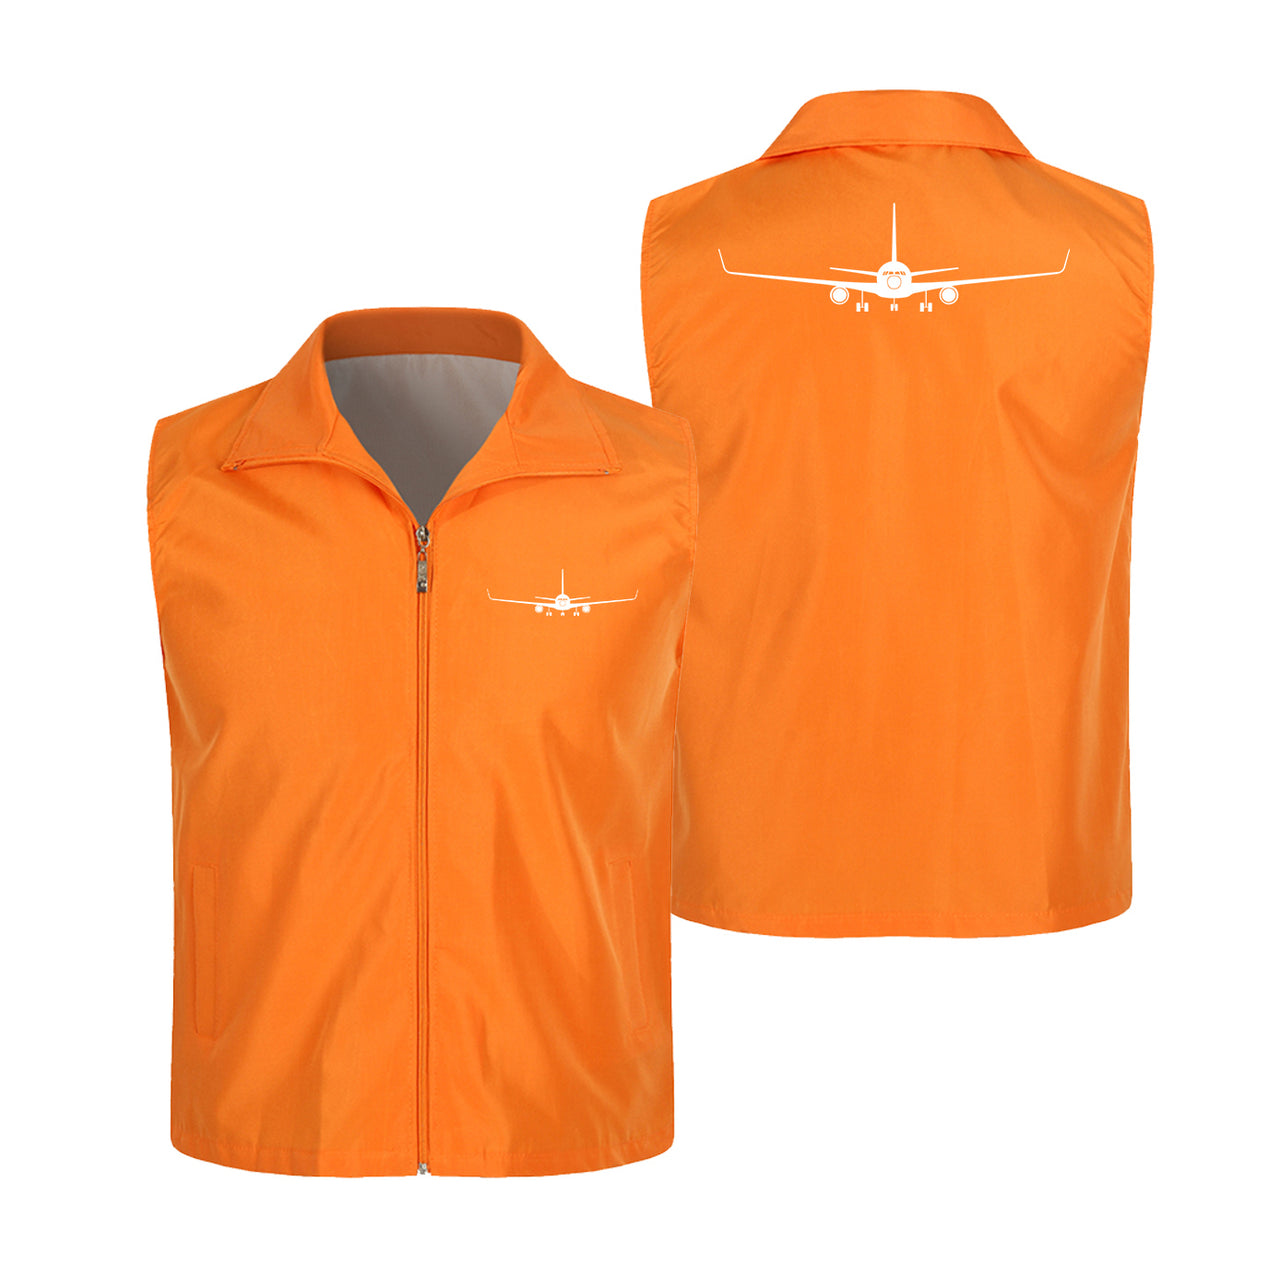 Boeing 767 Silhouette Designed Thin Style Vests